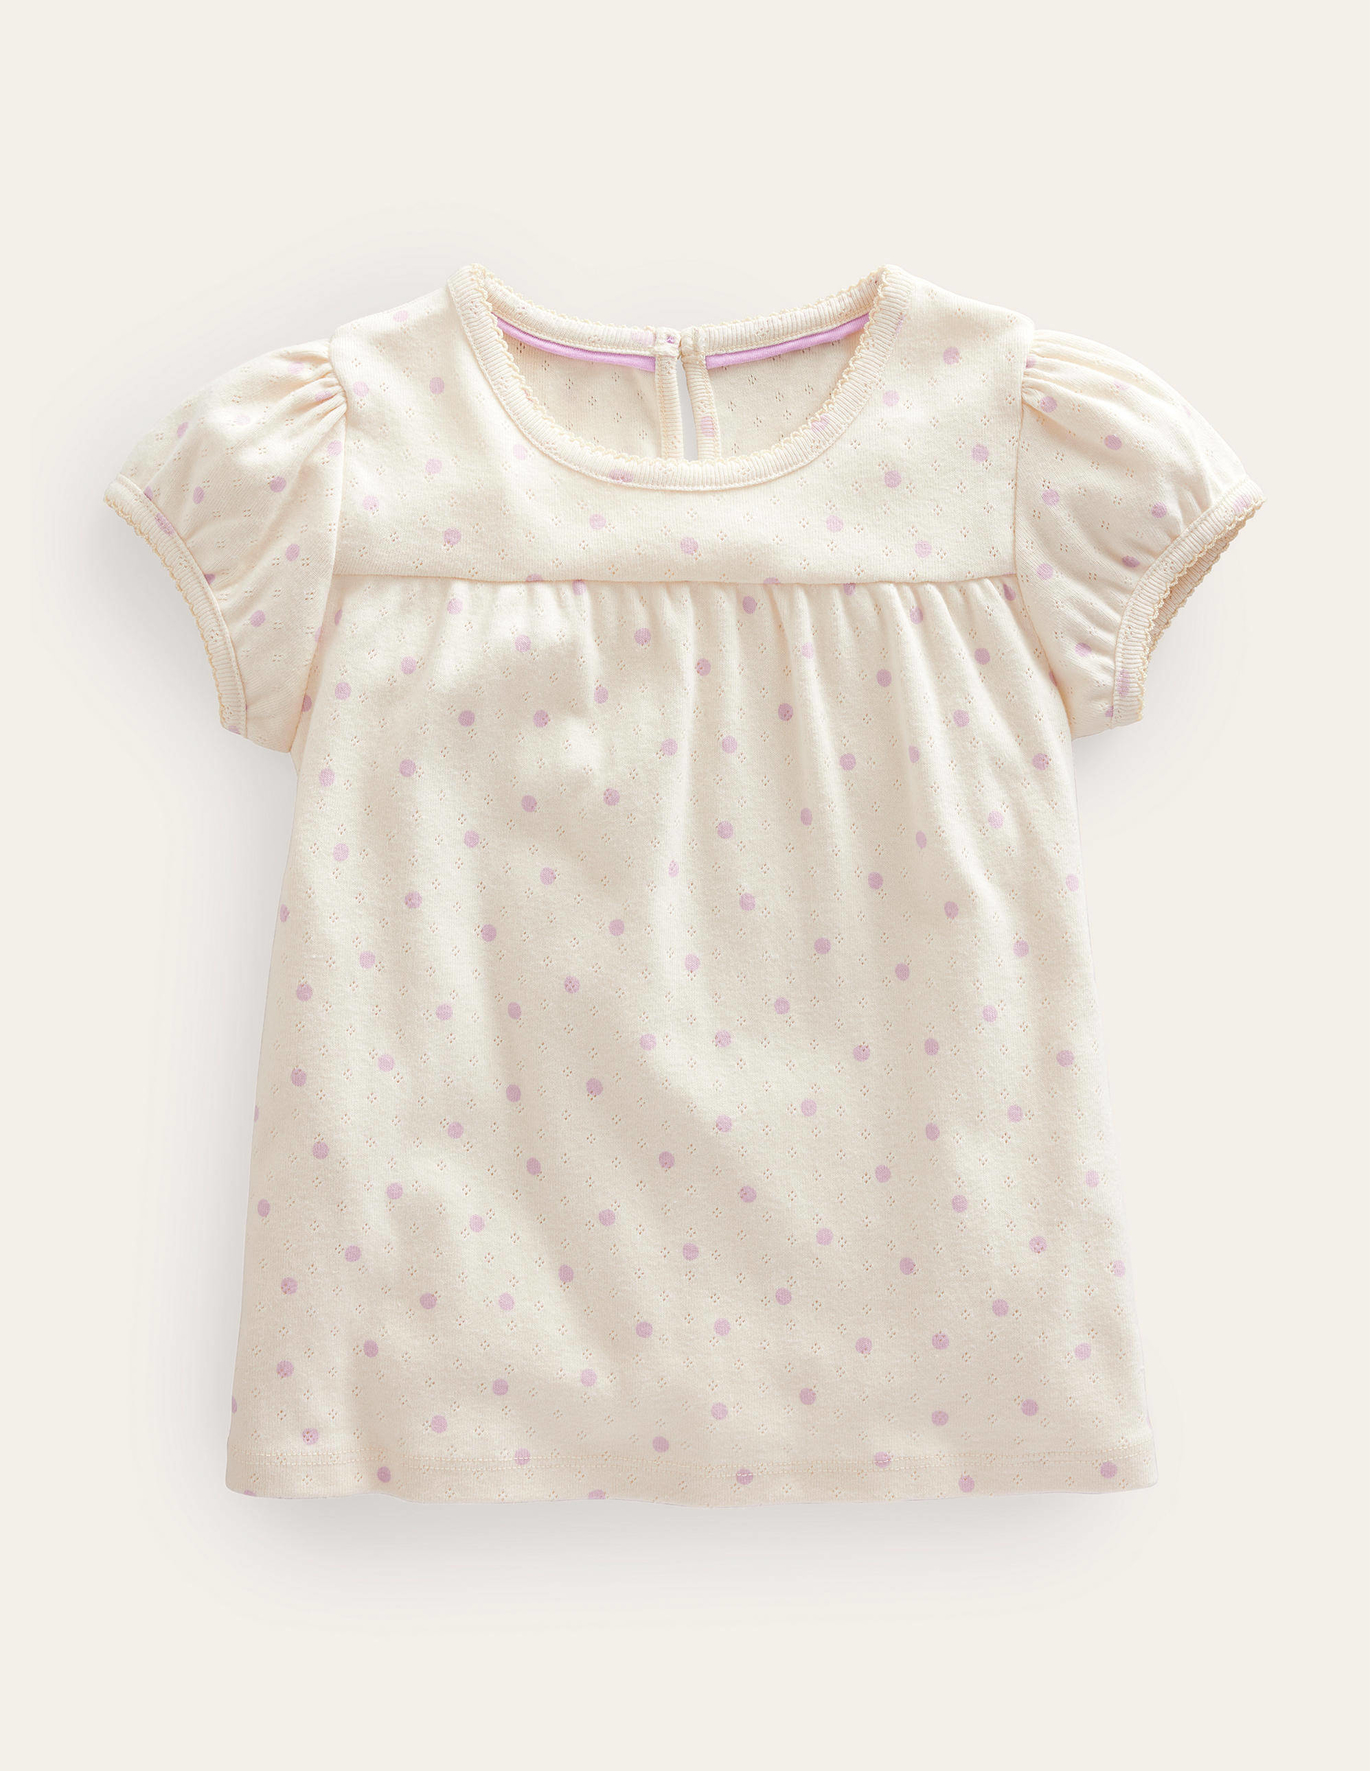 Boden Pointelle Top - Ivory